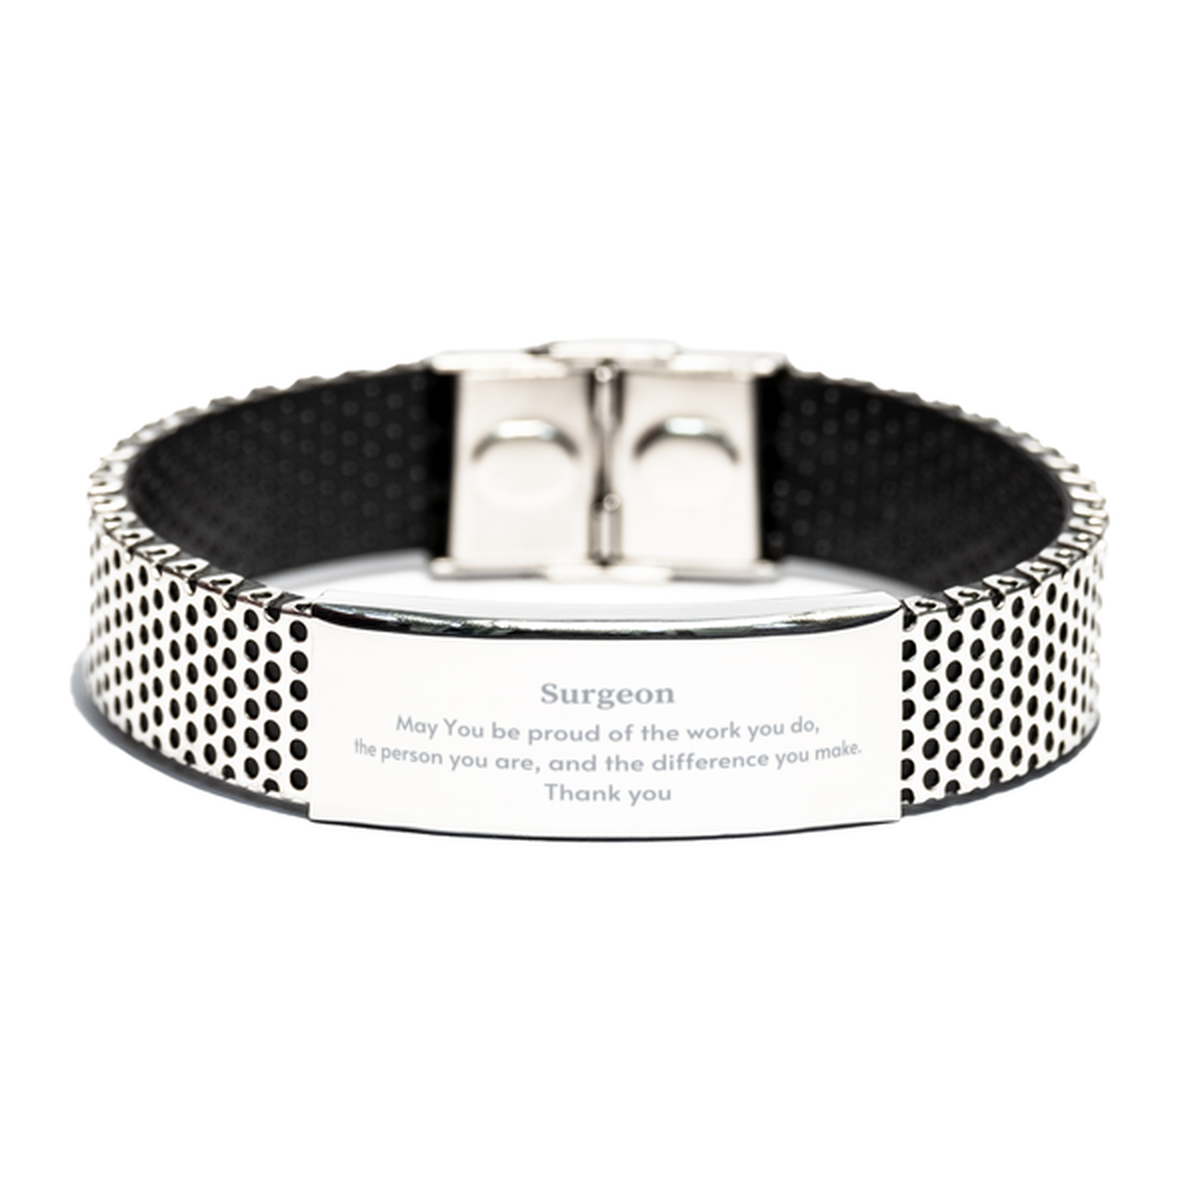 Heartwarming Stainless Steel Bracelet Retirement Coworkers Gifts for Surgeon, Surgeon May You be proud of the work you do, the person you are Gifts for Boss Men Women Friends